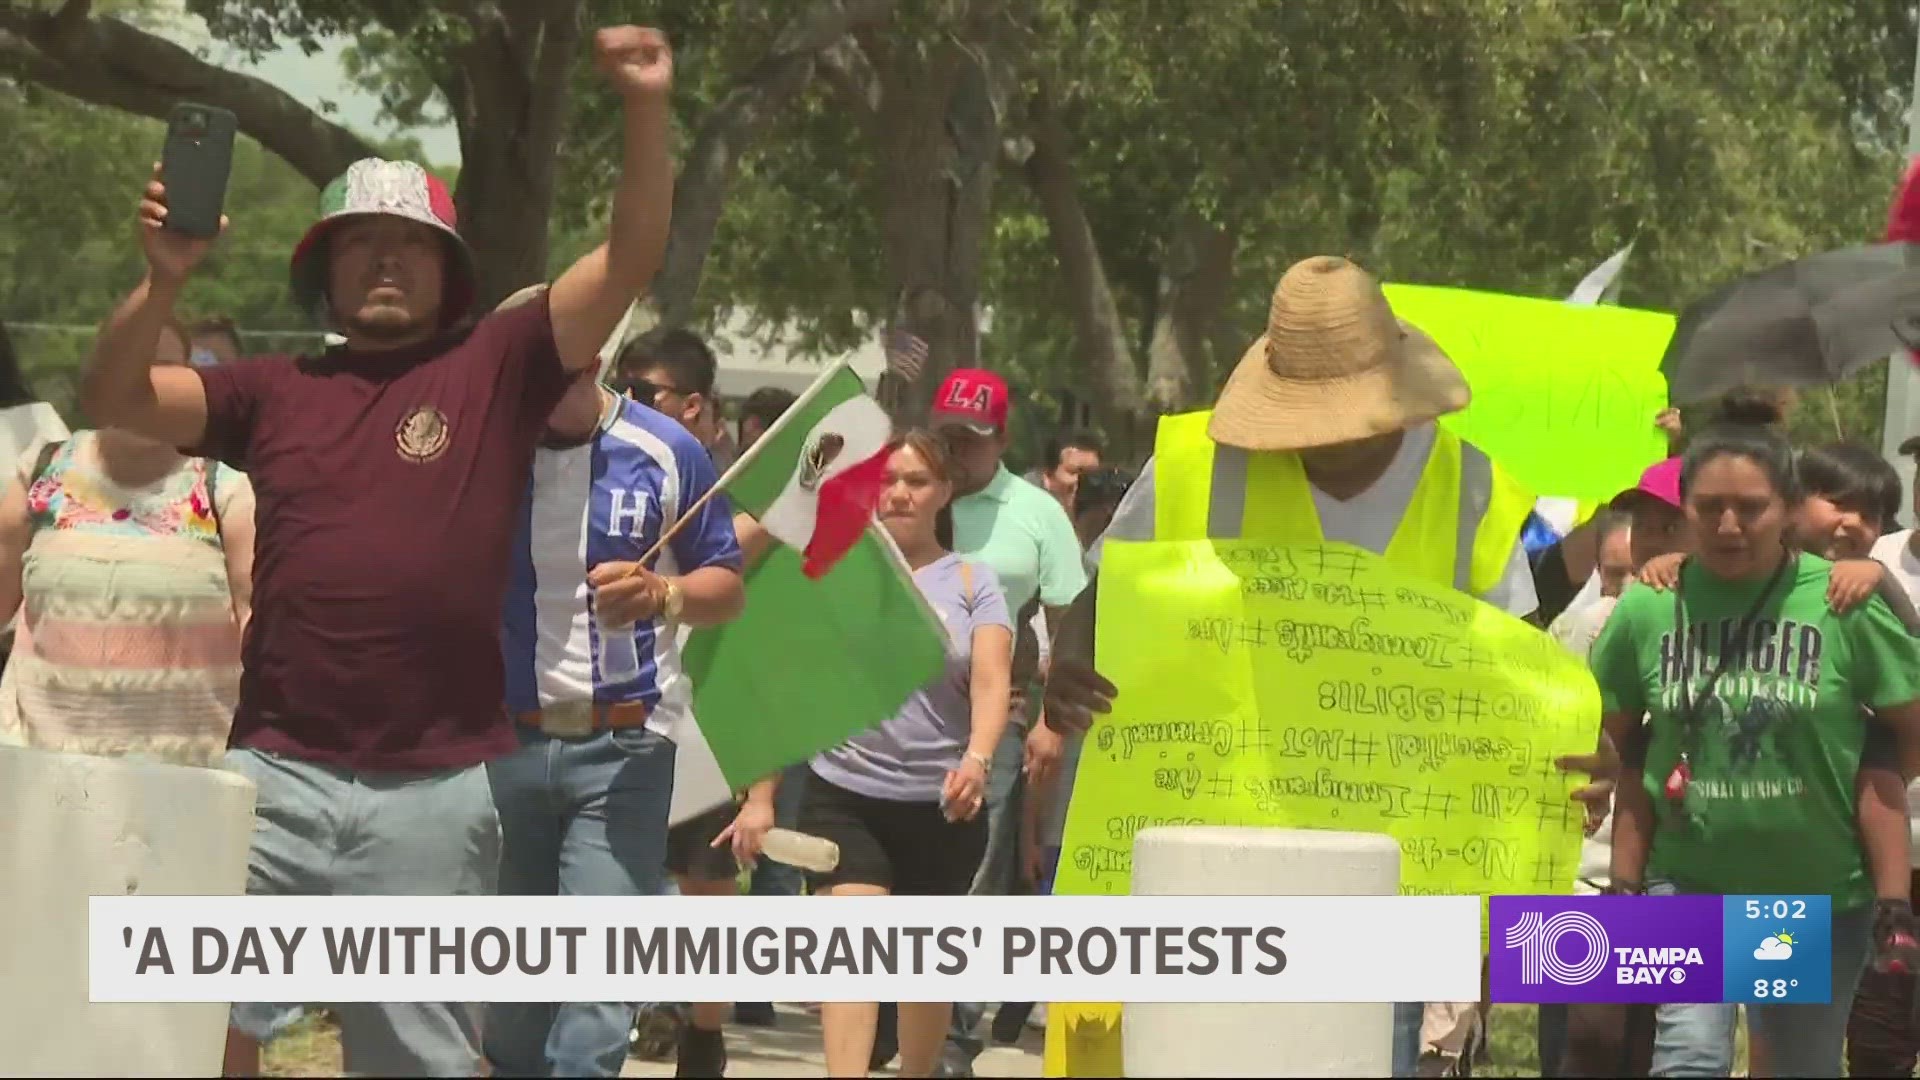 People are participating in a protest against legislation signed by Gov. Ron DeSantis critics say is anti-immigration.